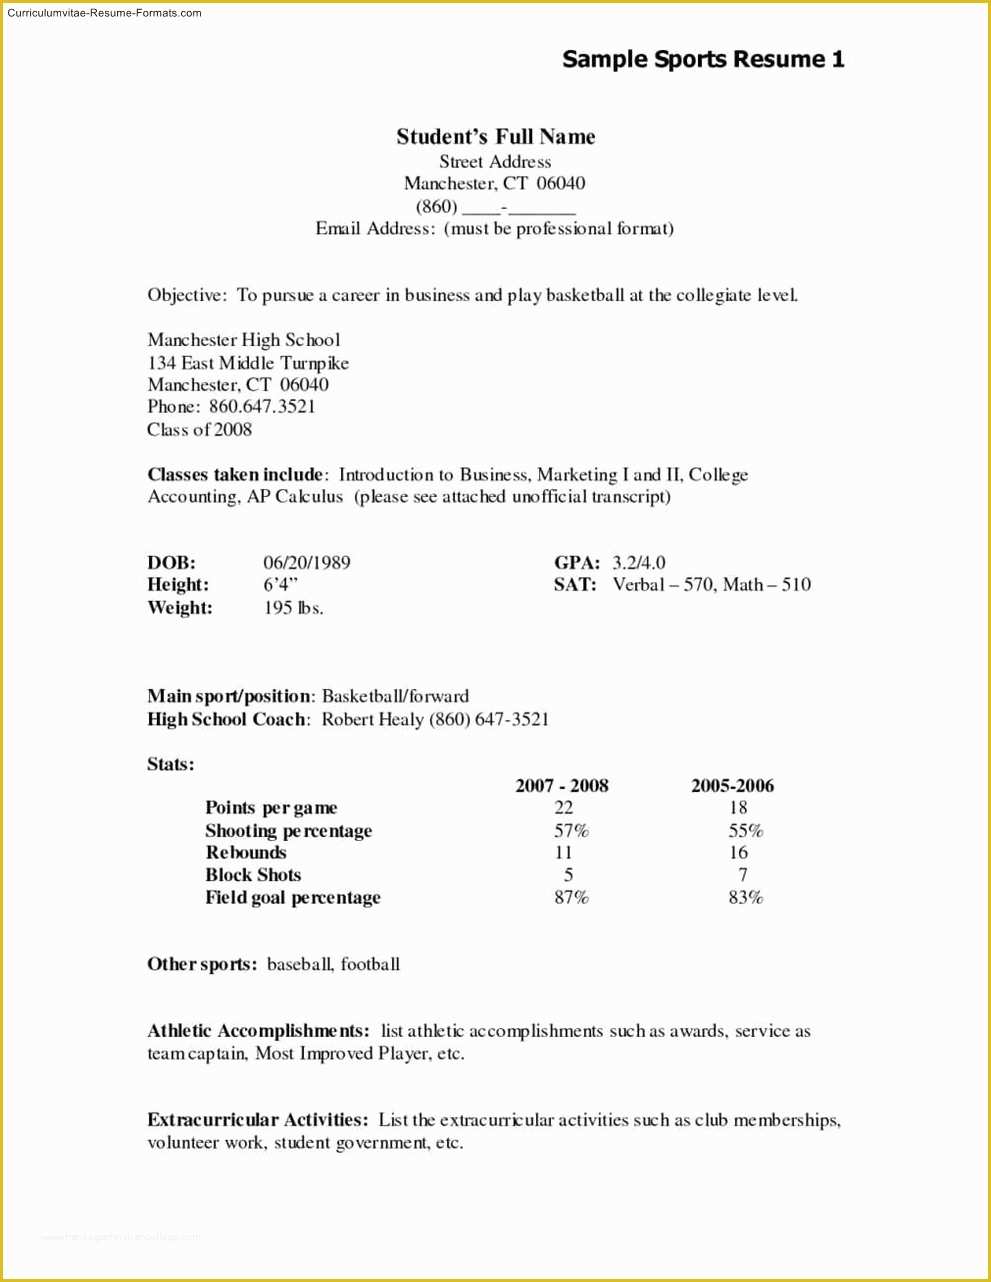 Resume Templates Free for High School Students Of Basic Resume Template for High School Students Free